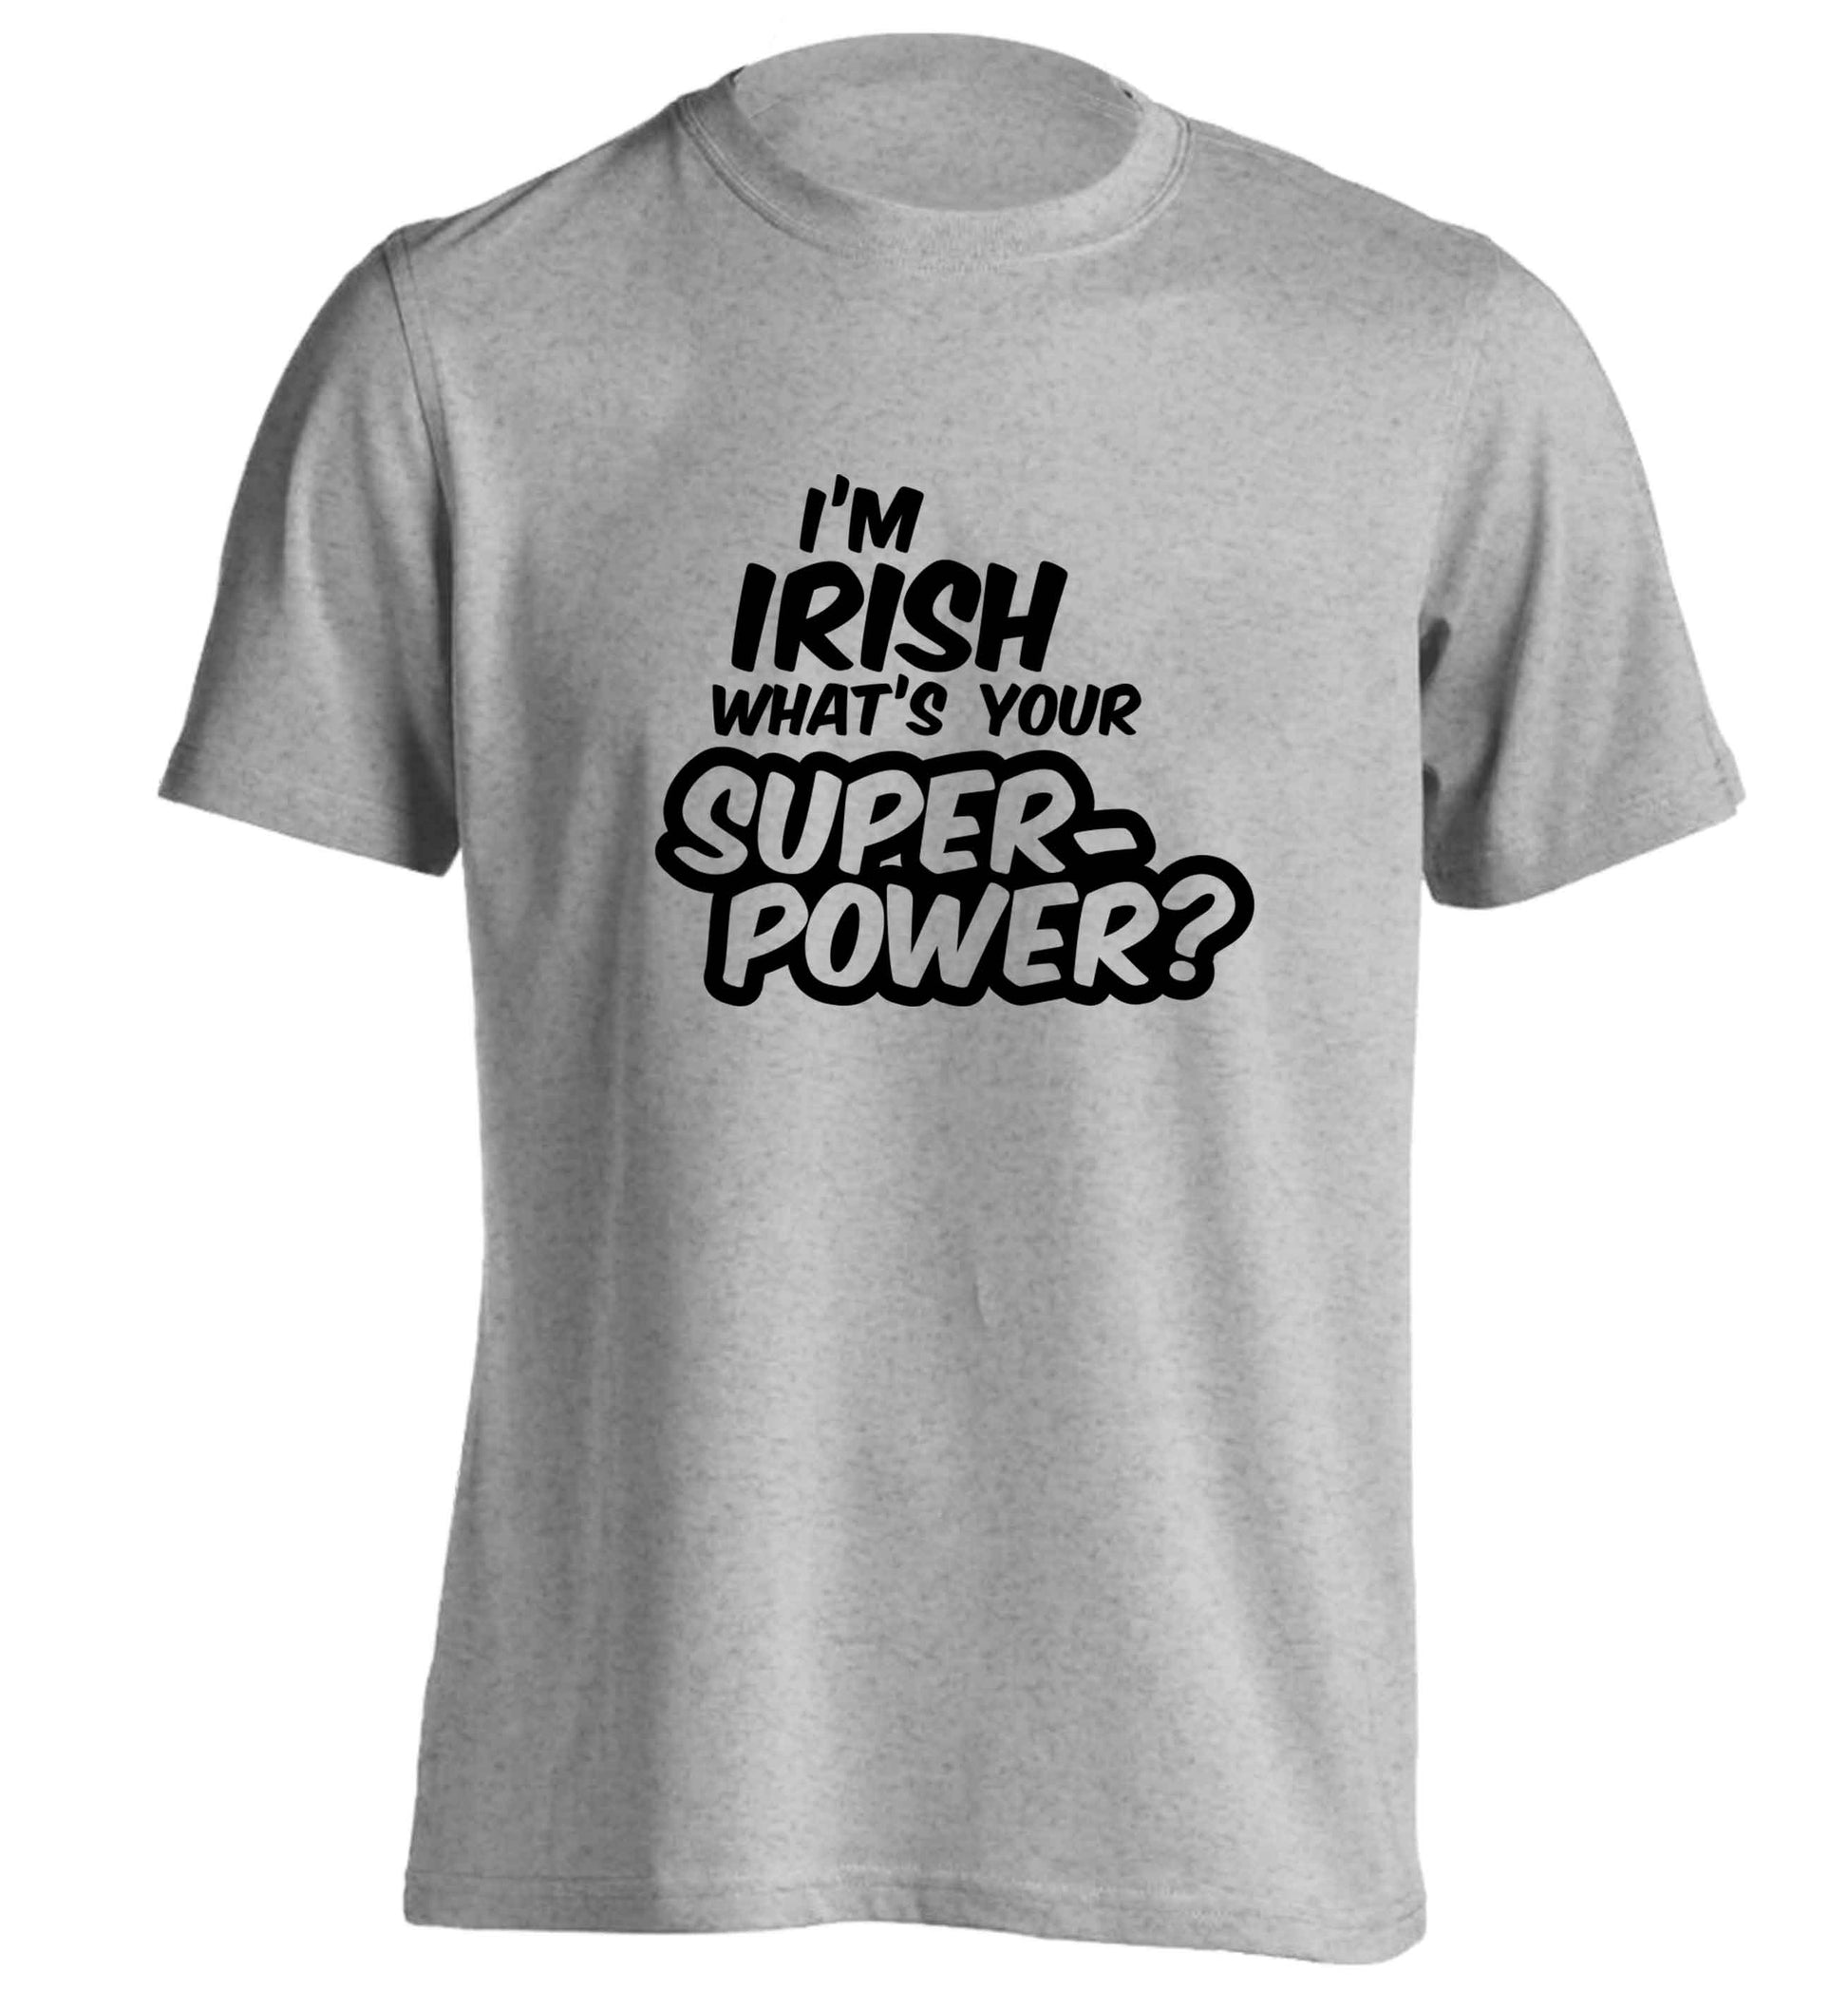 I'm Irish what's your superpower? adults unisex grey Tshirt 2XL